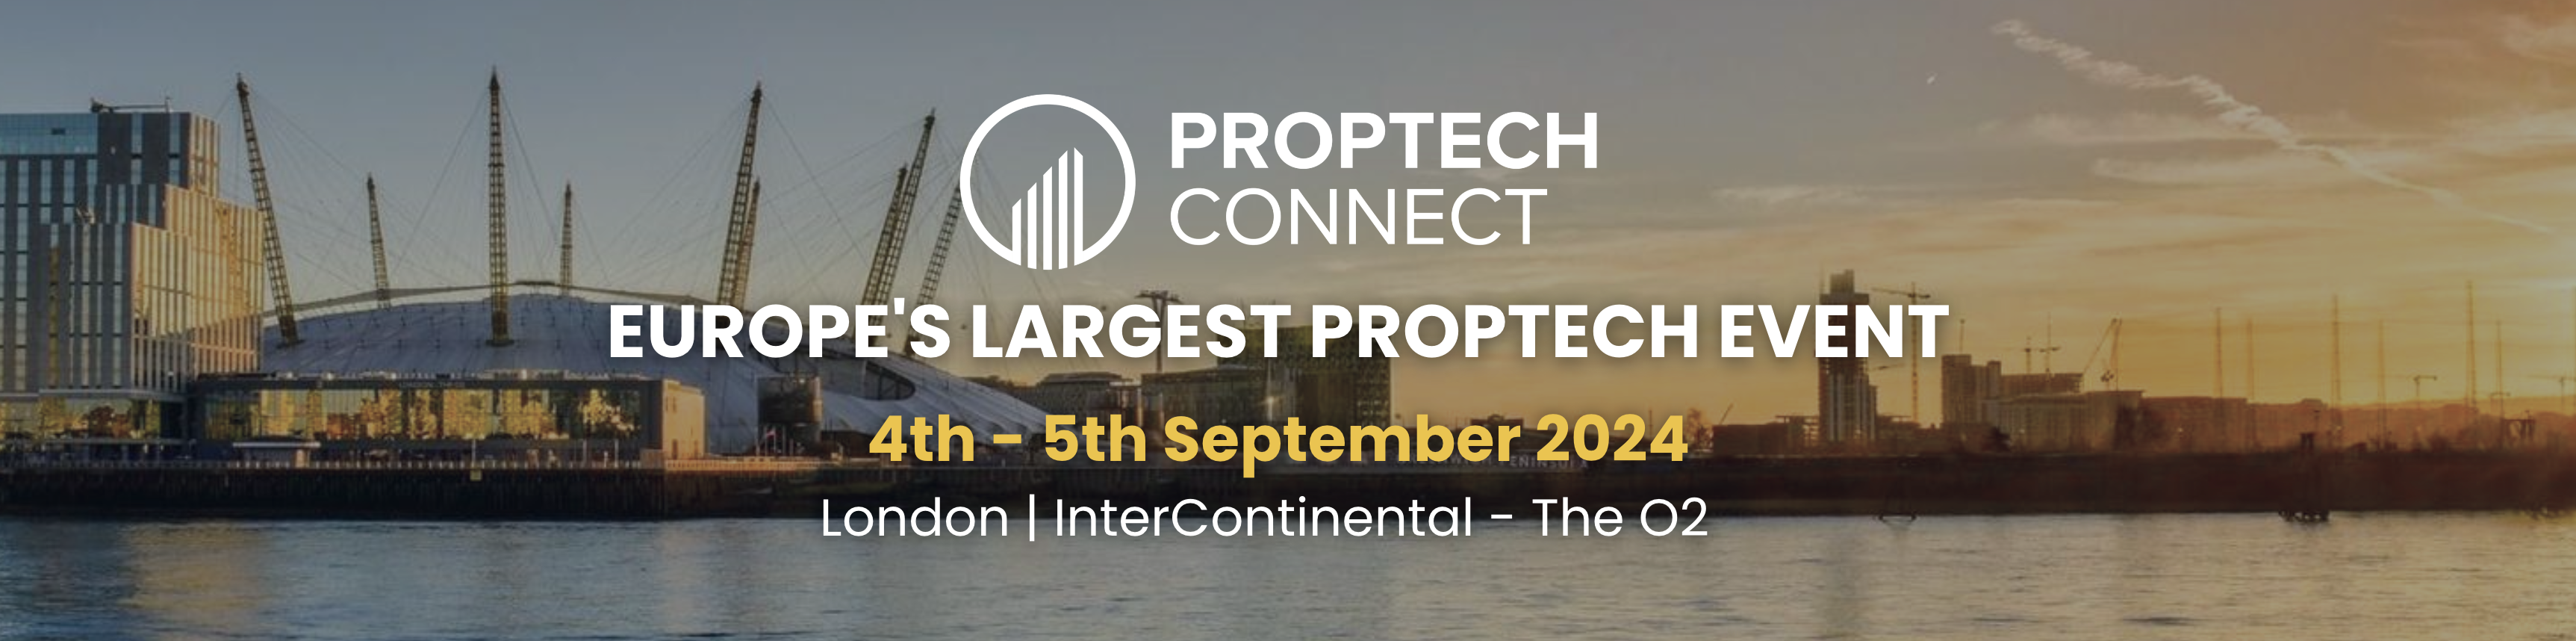 PropTech Connect - Europe's Largest PropTech Event - Buy tickets 2024